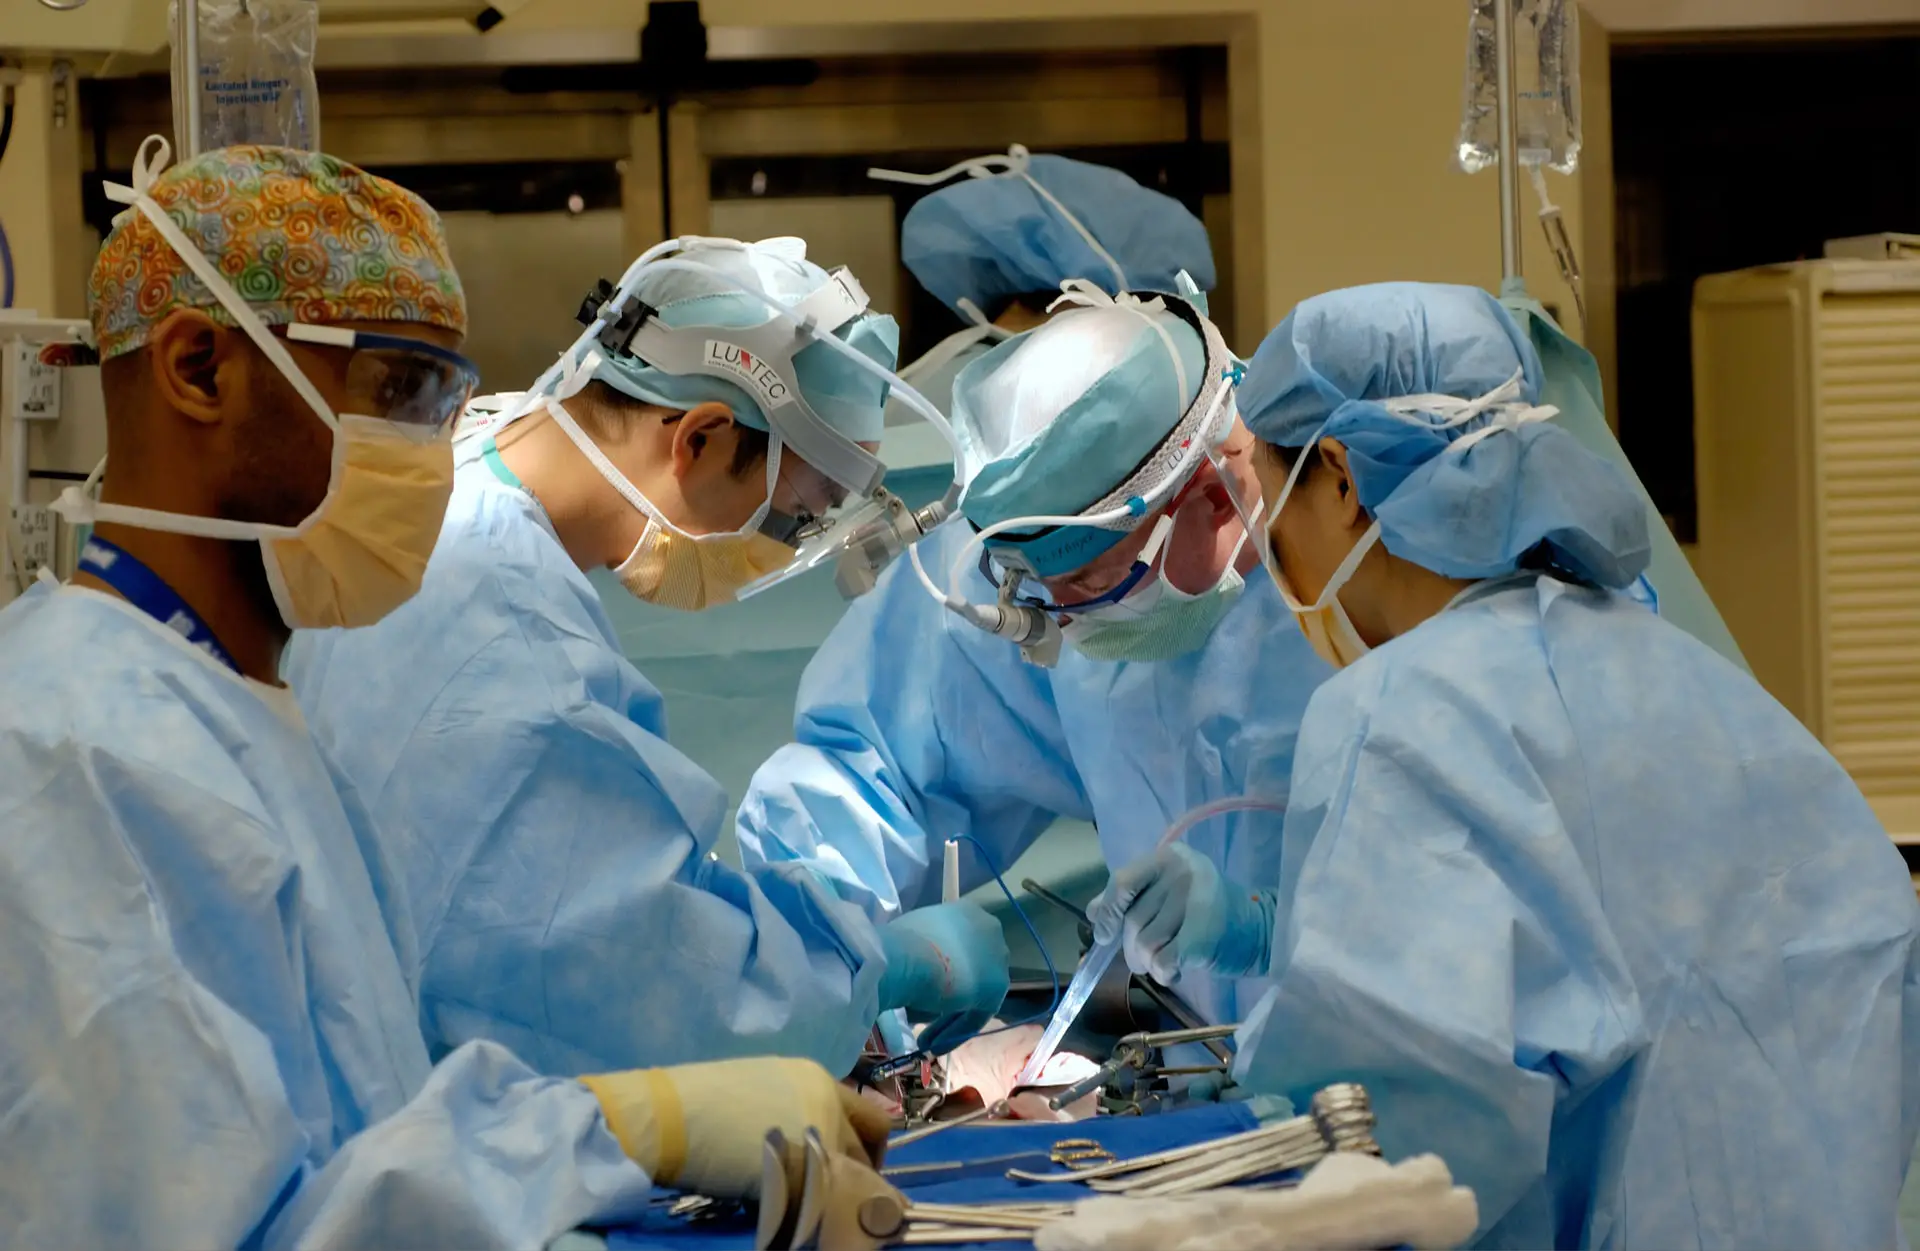 Denver Hospital Becomes the First in the Region to Use AR Glasses for Surgeries